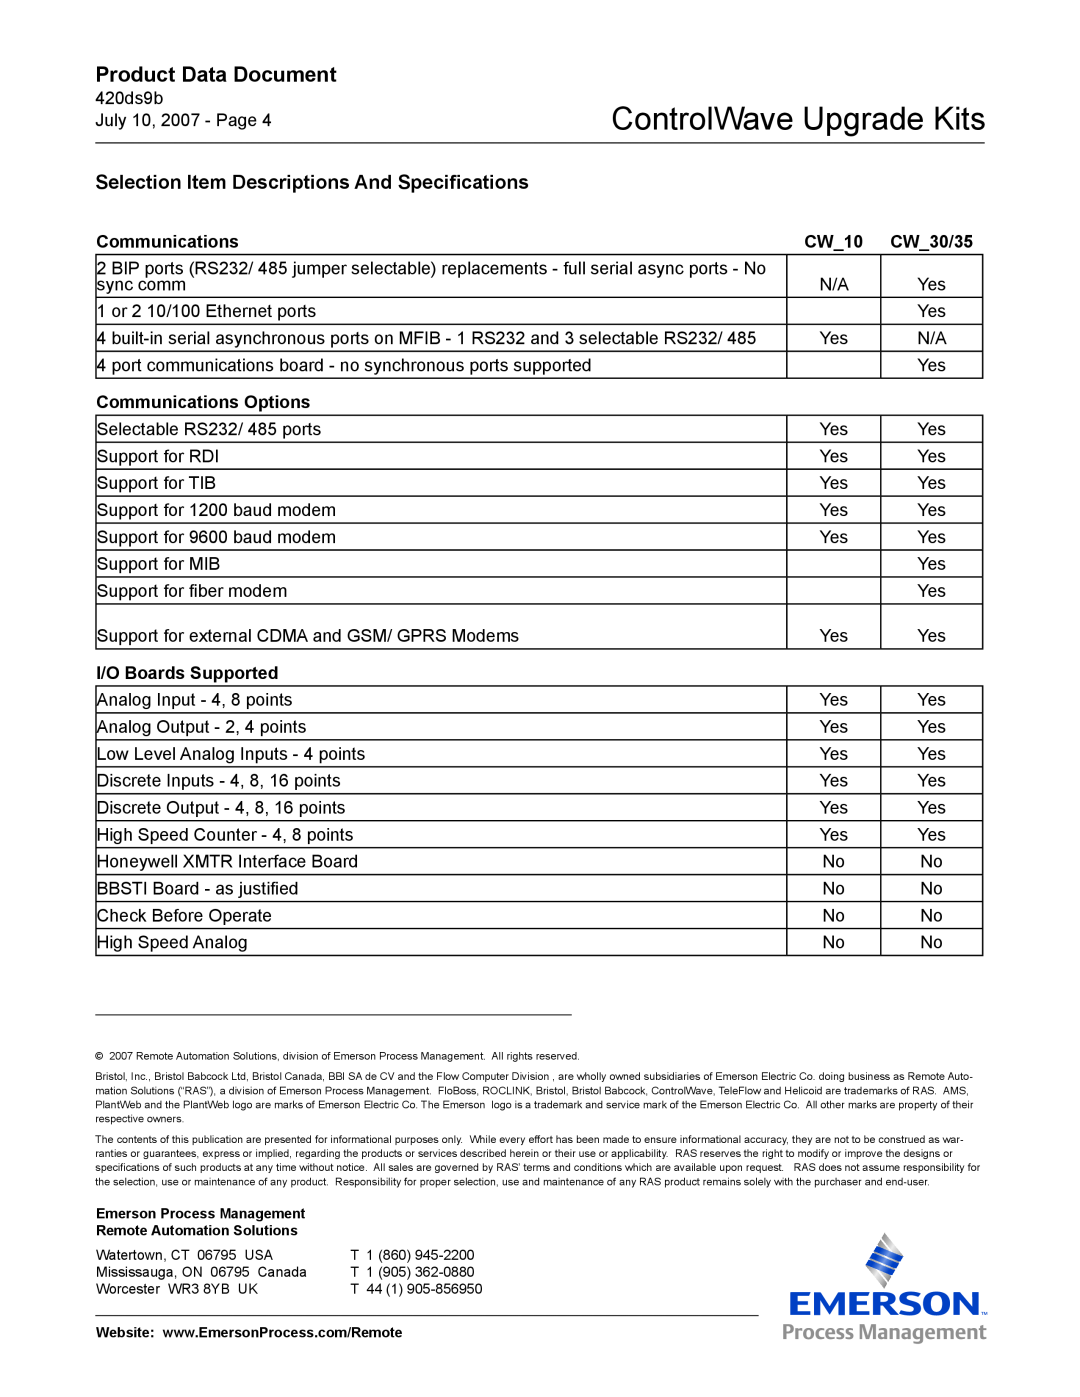 Emerson Process Management CW_35, CW_10 manual Selection Item Descriptions And Specifications, Communications, CW10, CW30/35 